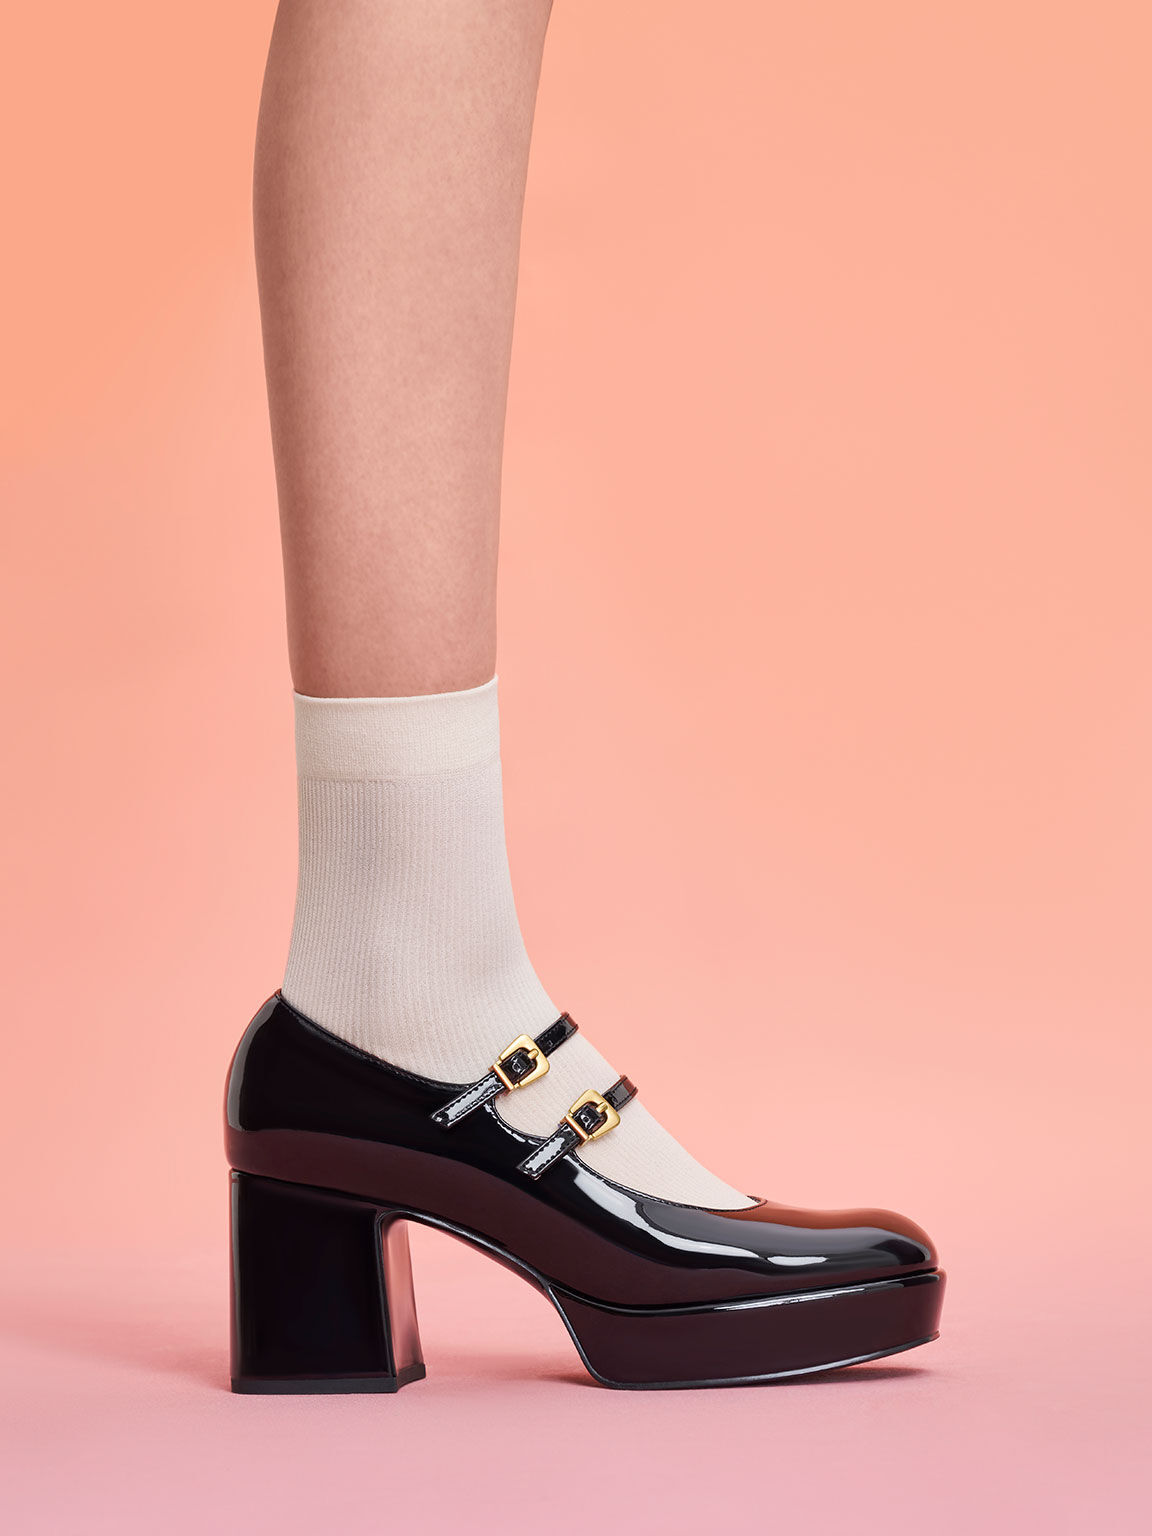 Lock And Key Patent Leather Mary Jane Heels *6-10* | Shoes | Personify –  Personify Shop